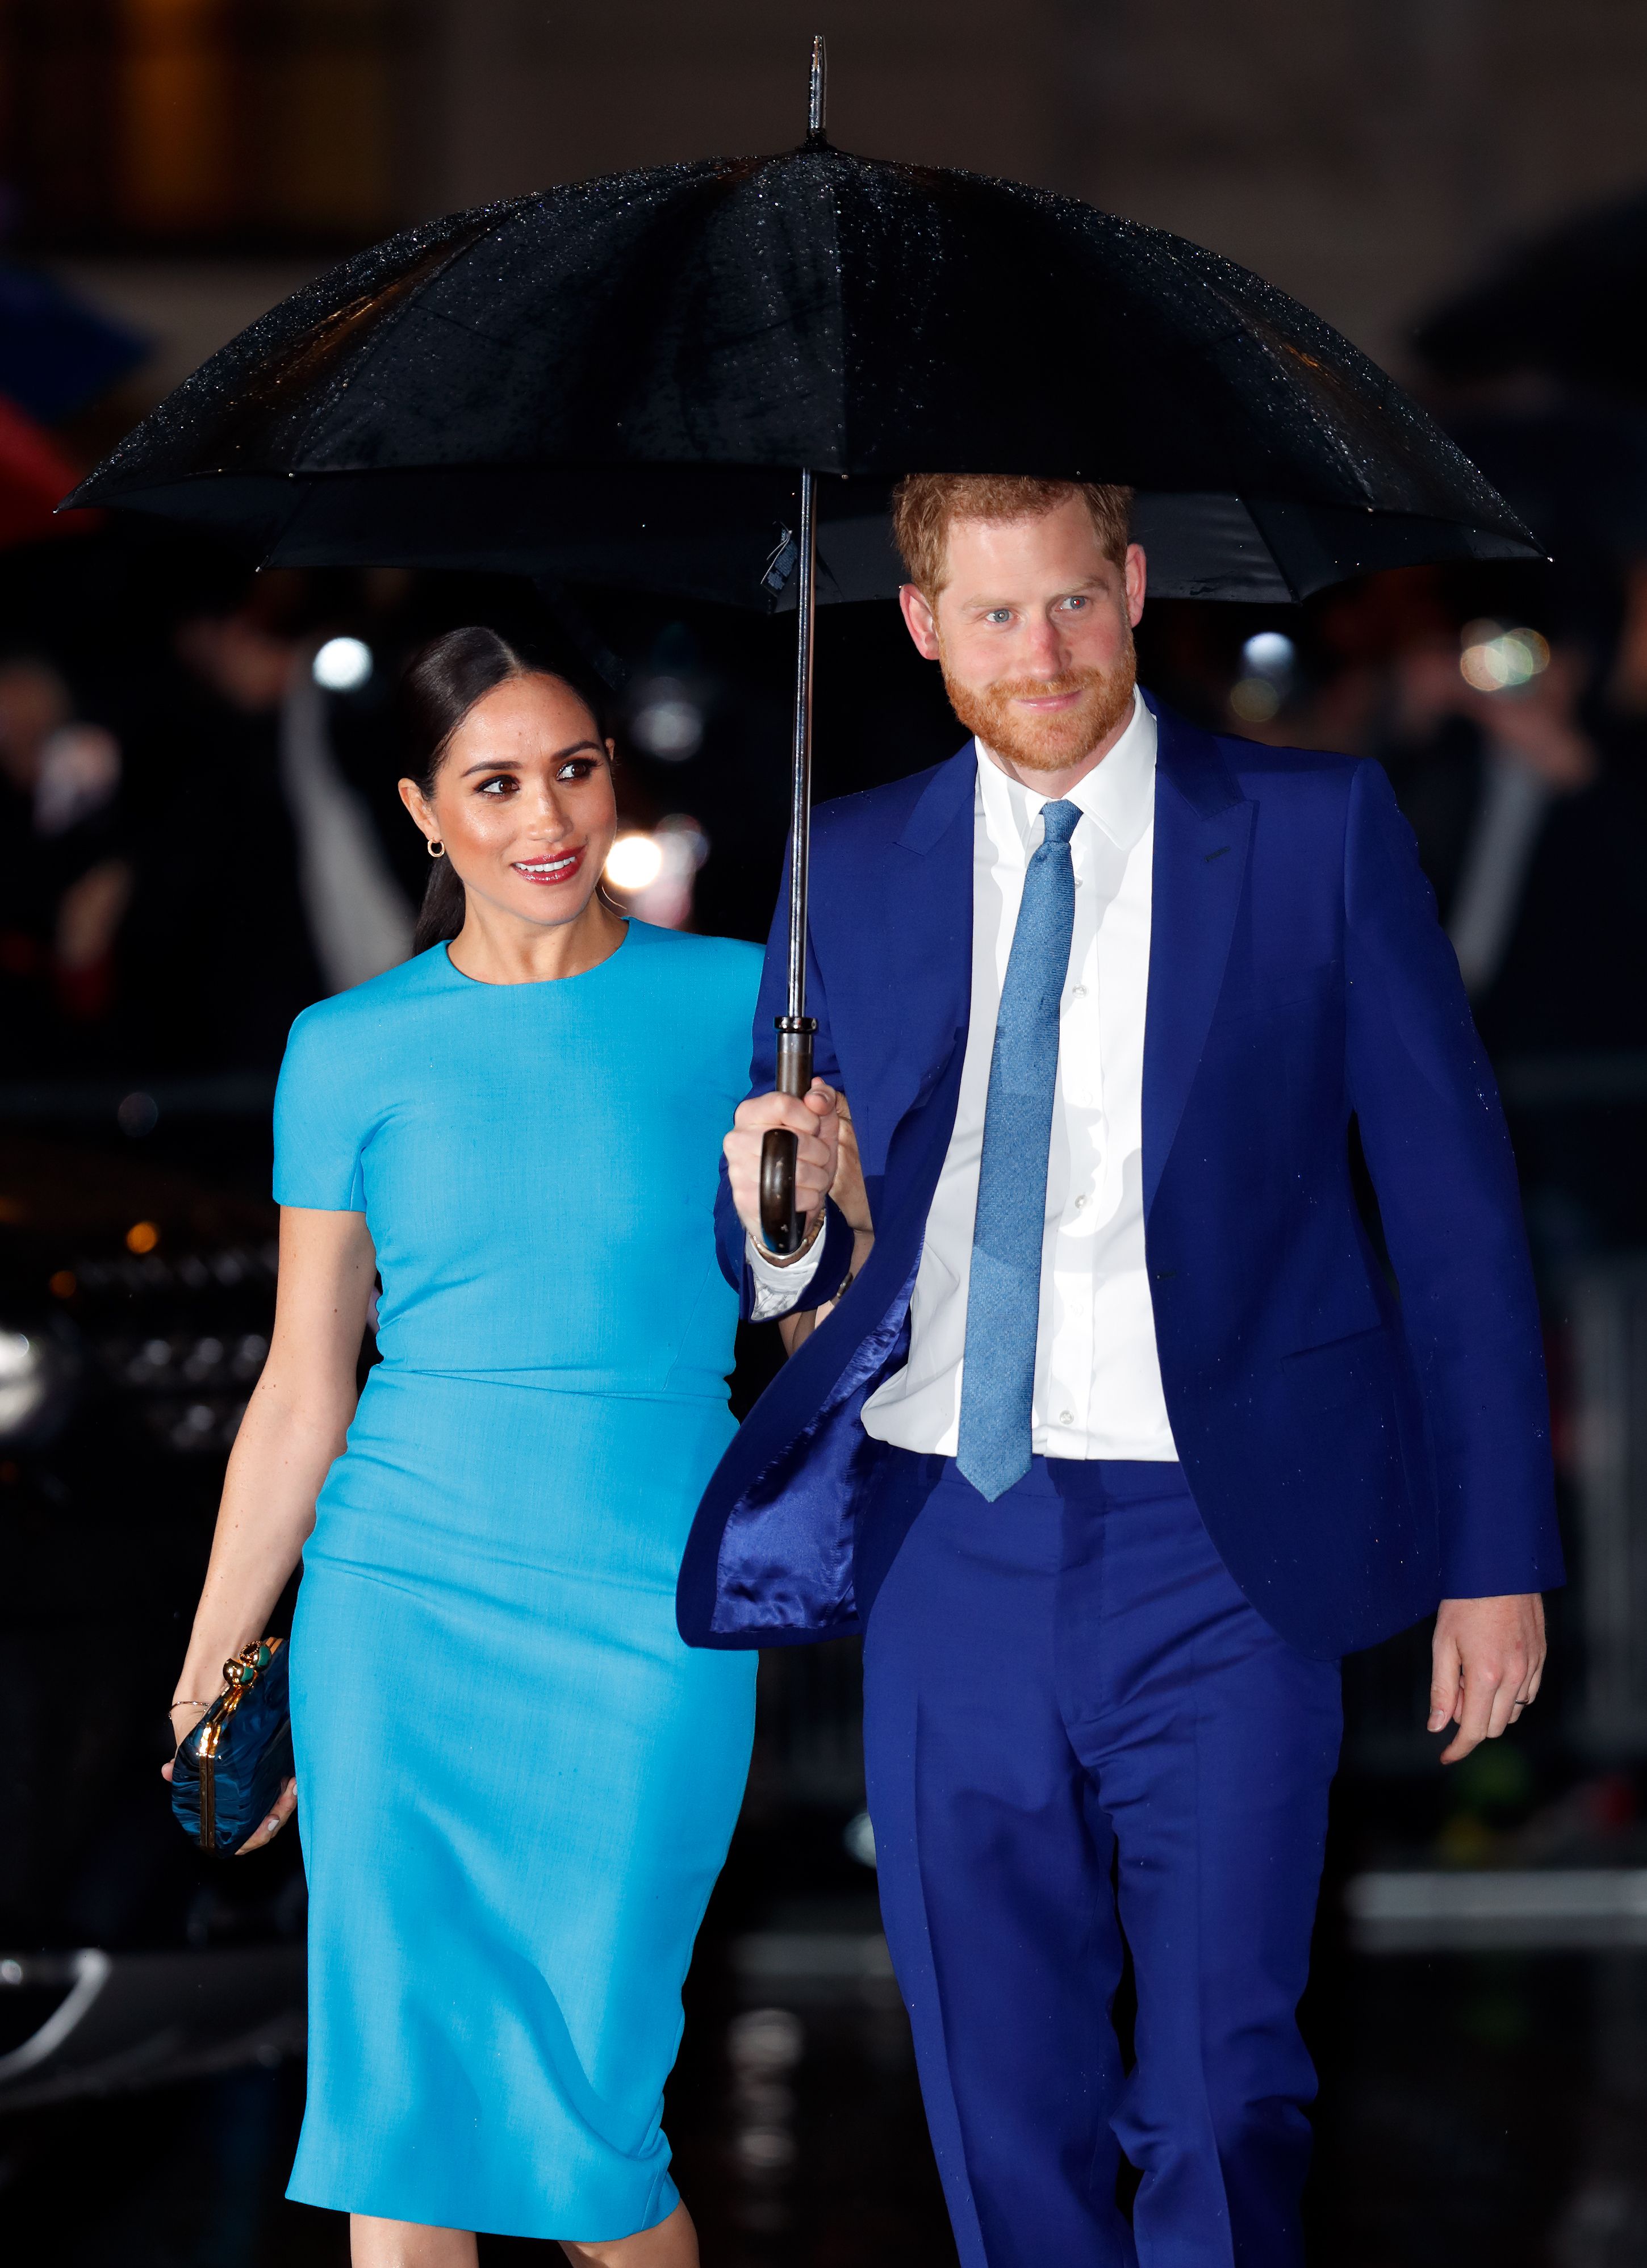 Duchess Meghan and Prince Harry at The Endeavour Fund Awards at Mansion House on March 5, 2020, in London, England | Photo: Getty Images